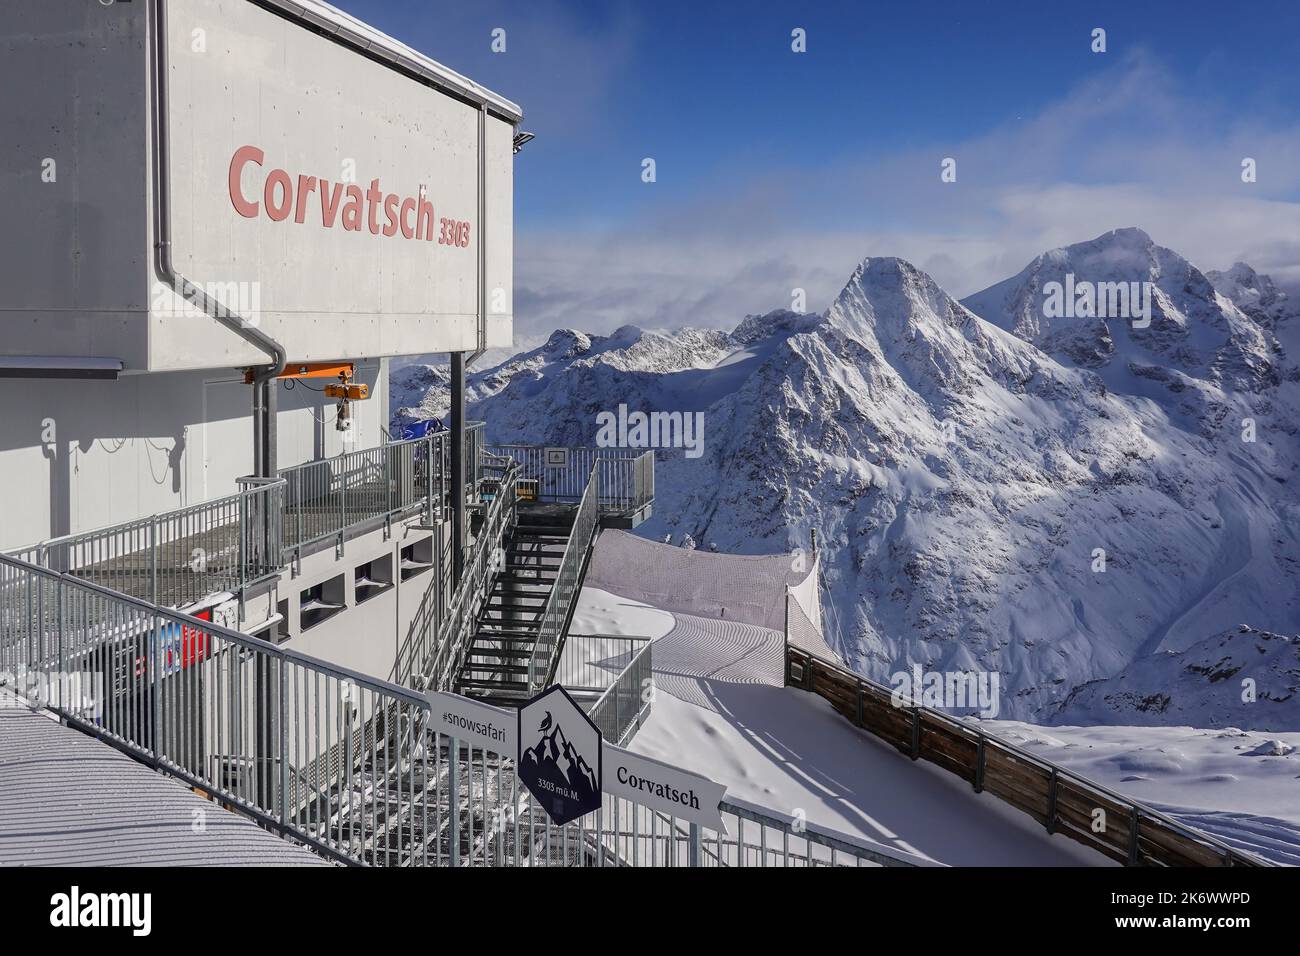 Corvatsch, Switzerland - December 05 2021: View of the Corvatsch cable car Bergstation that stands at 3303m in the Swiss alps in Canton Graubunden Stock Photo